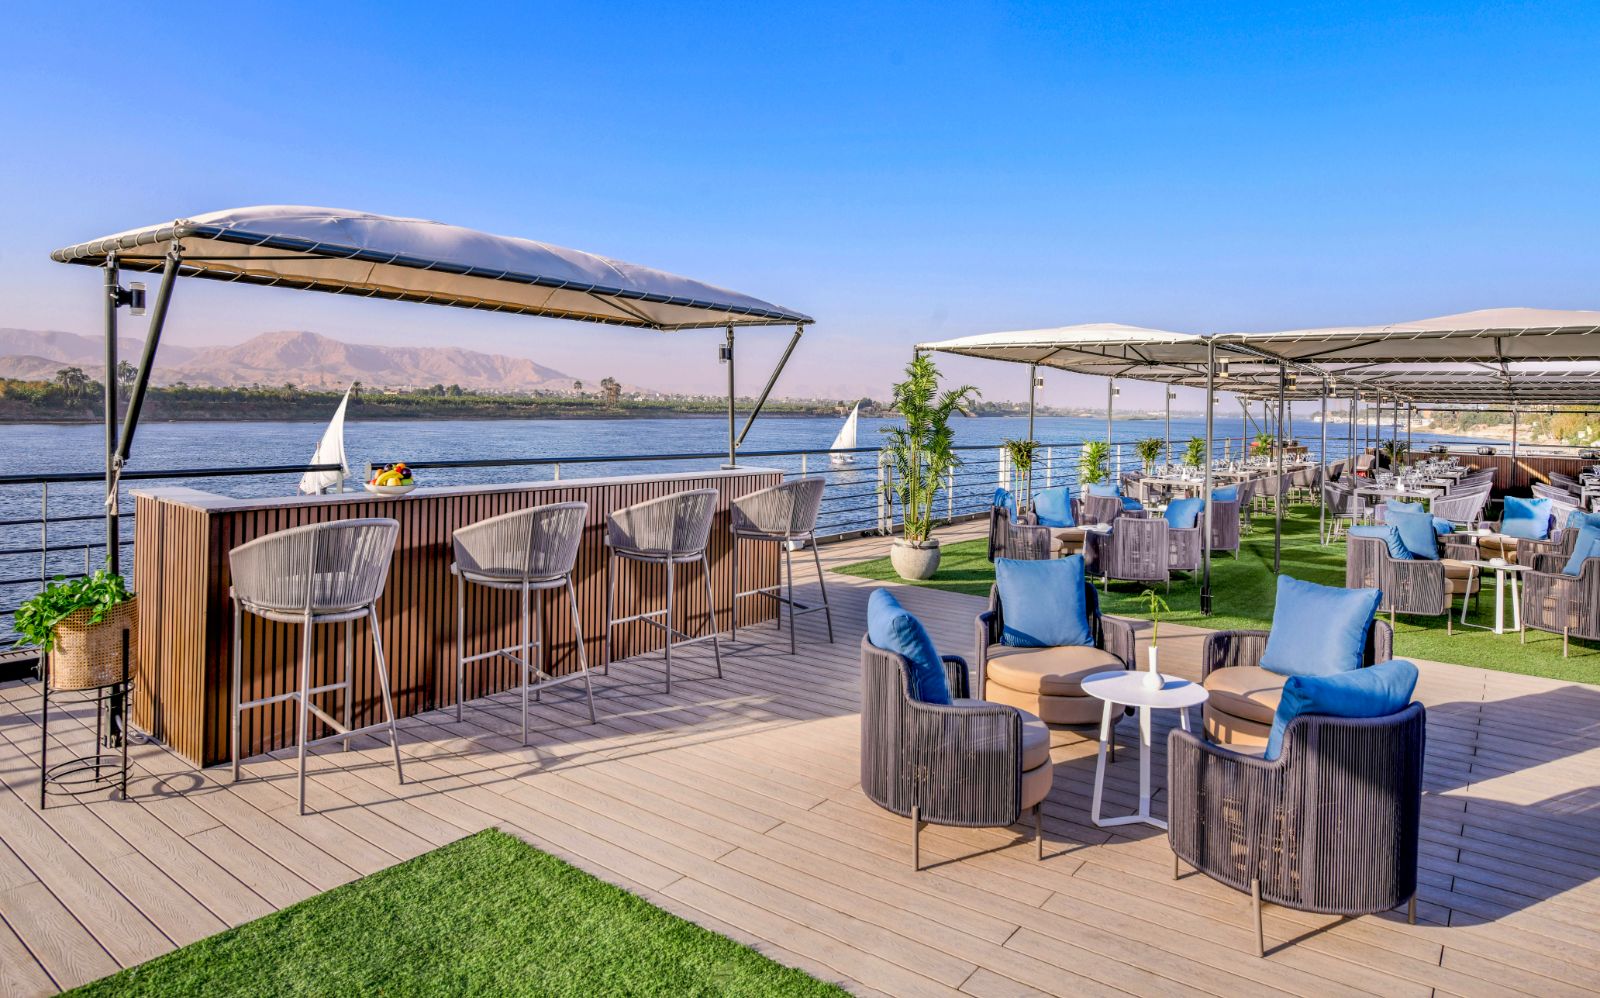 Alfresco seating at the bar onboard the Historia boutique Nile cruise hotel in Eypt